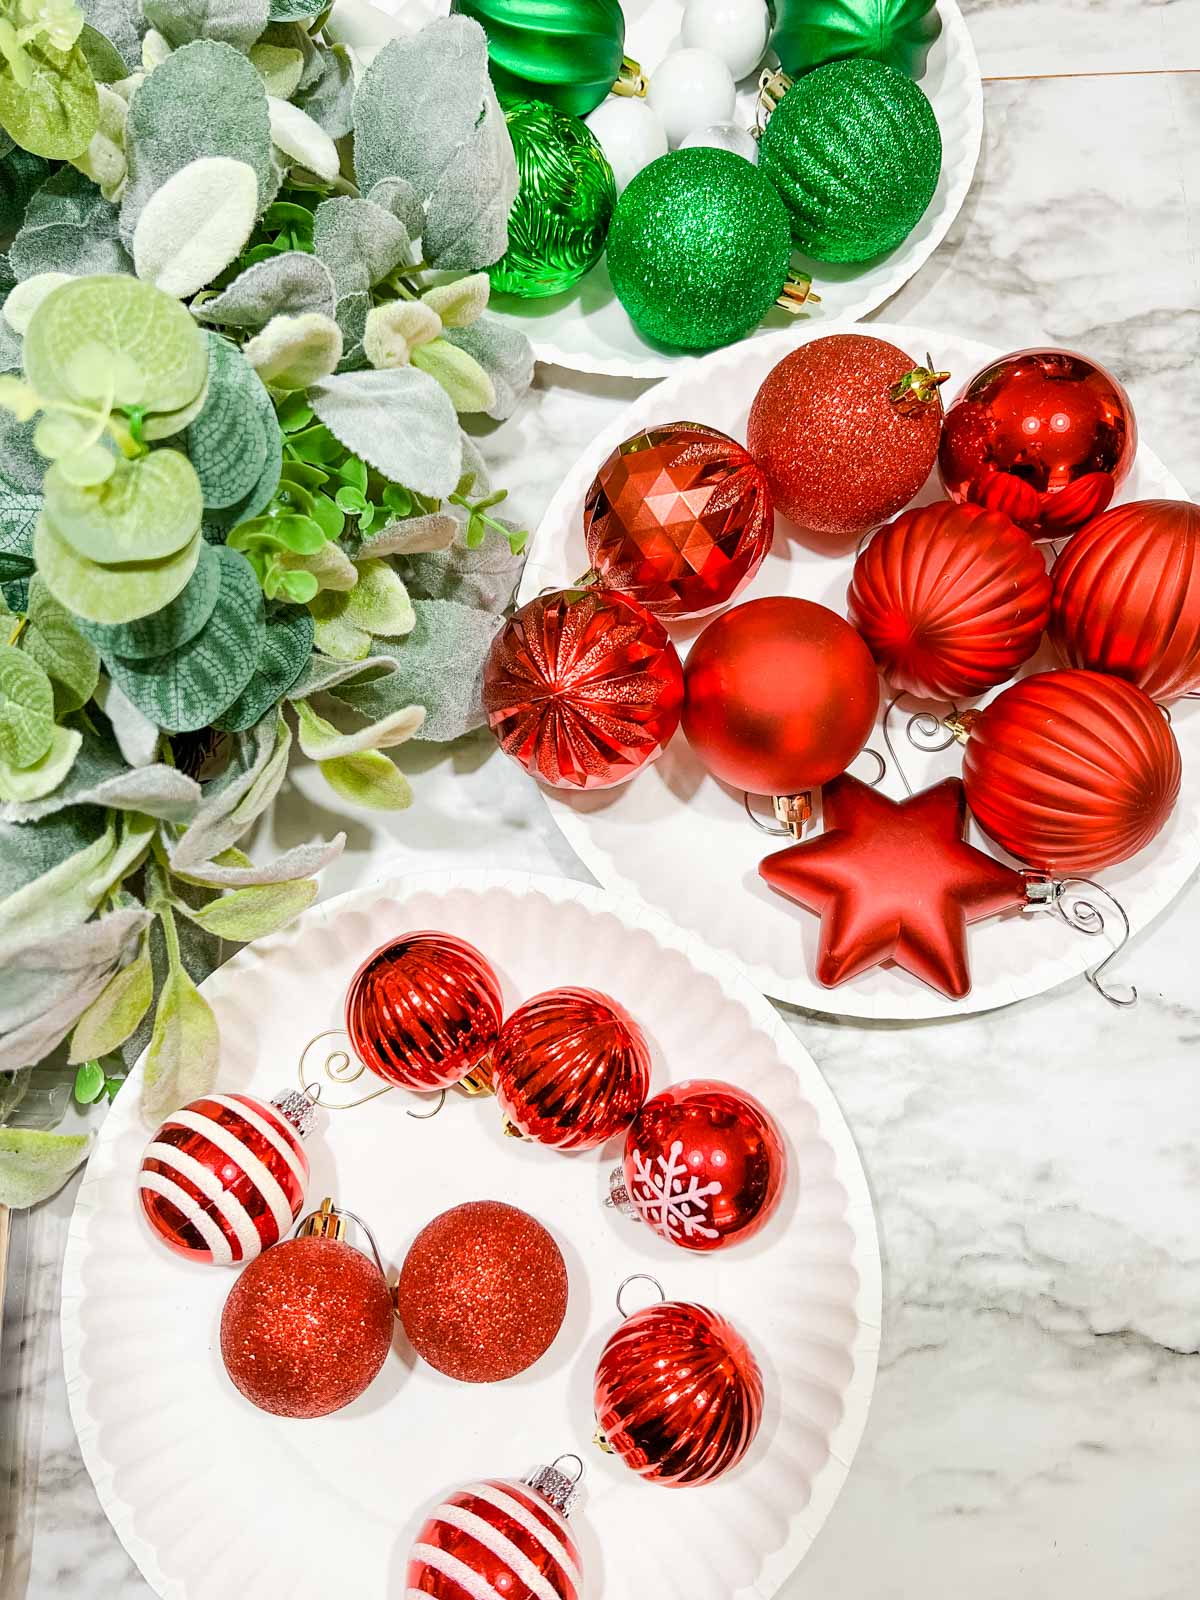 A variety of Christmas ornaments on plates next to a wreath in shades of red and green and in varying sizes.